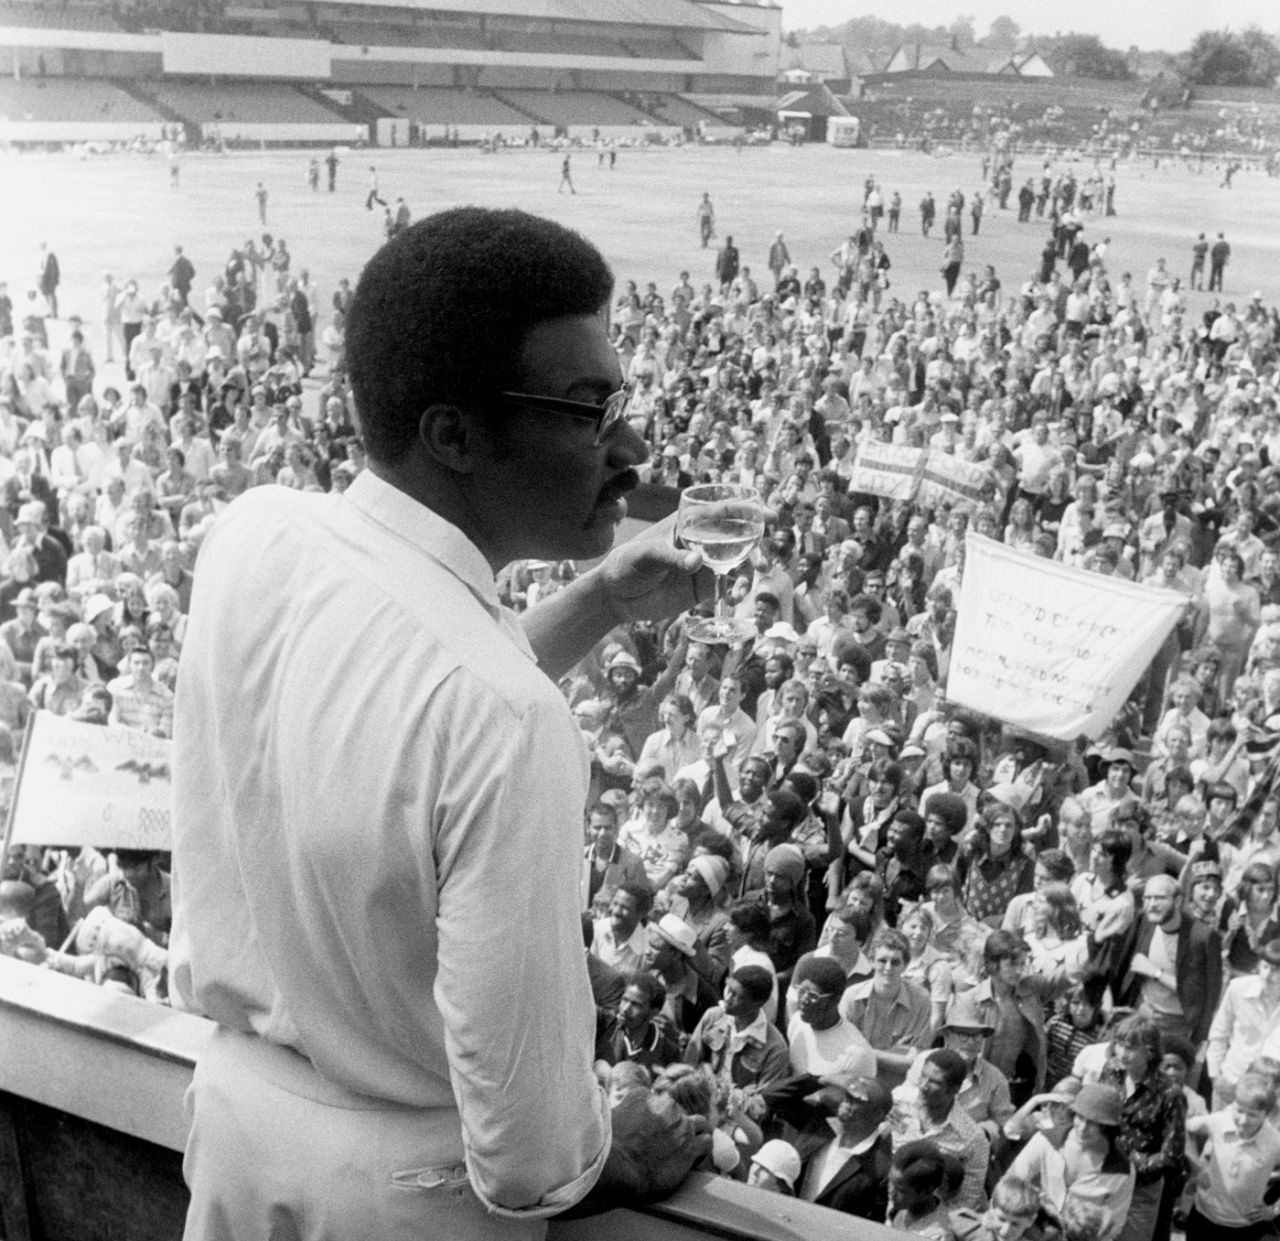 Clive Lloyd raises a toast to the crowd, England v West Indies, 4th Test, Headingley, 5th day, July 27, 1976